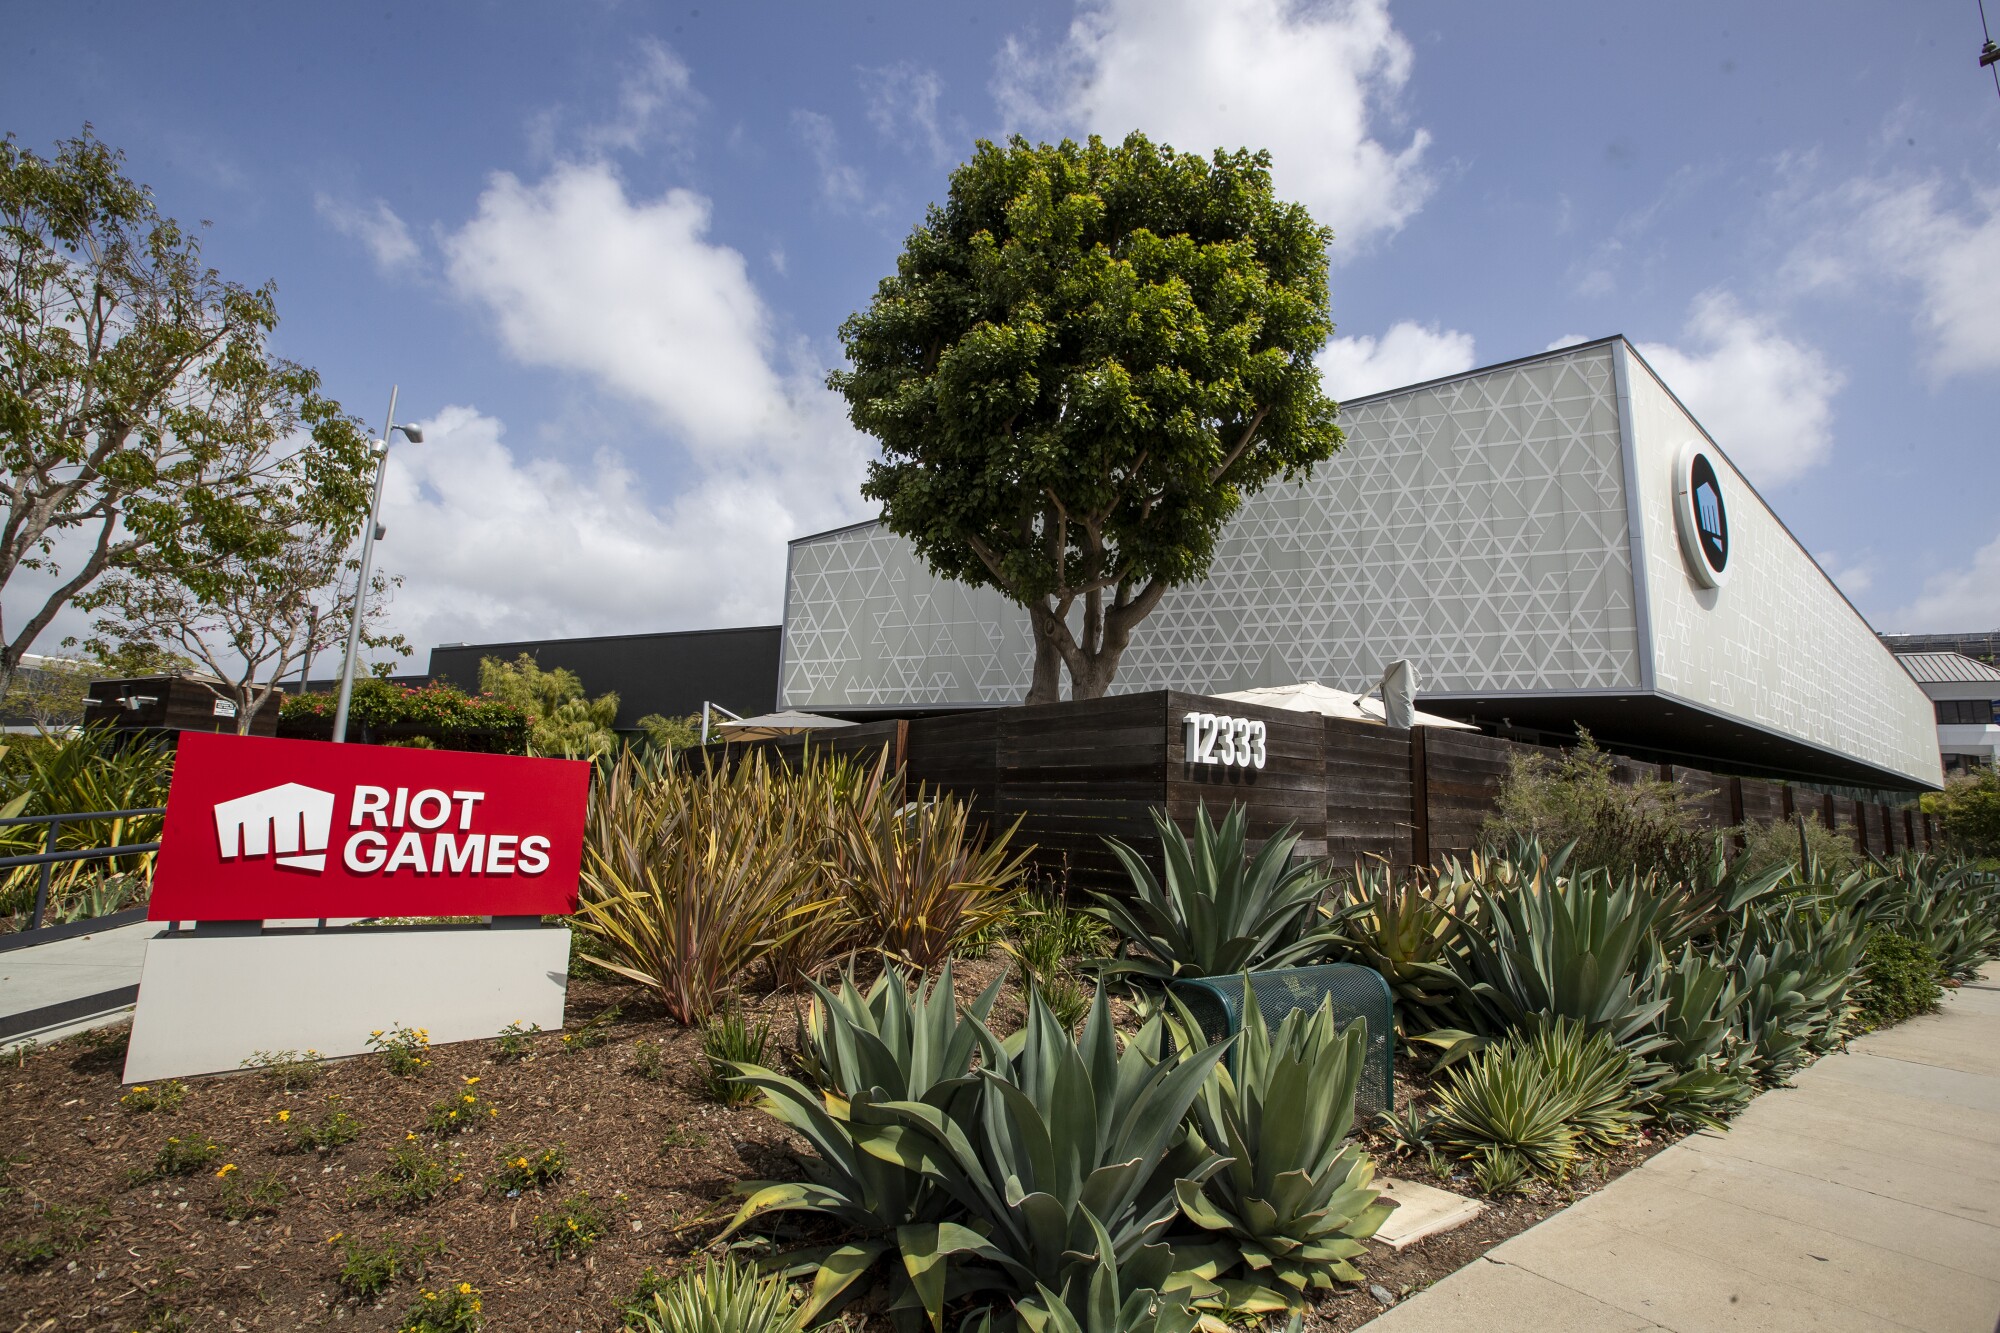 Exterior view of Riot Games